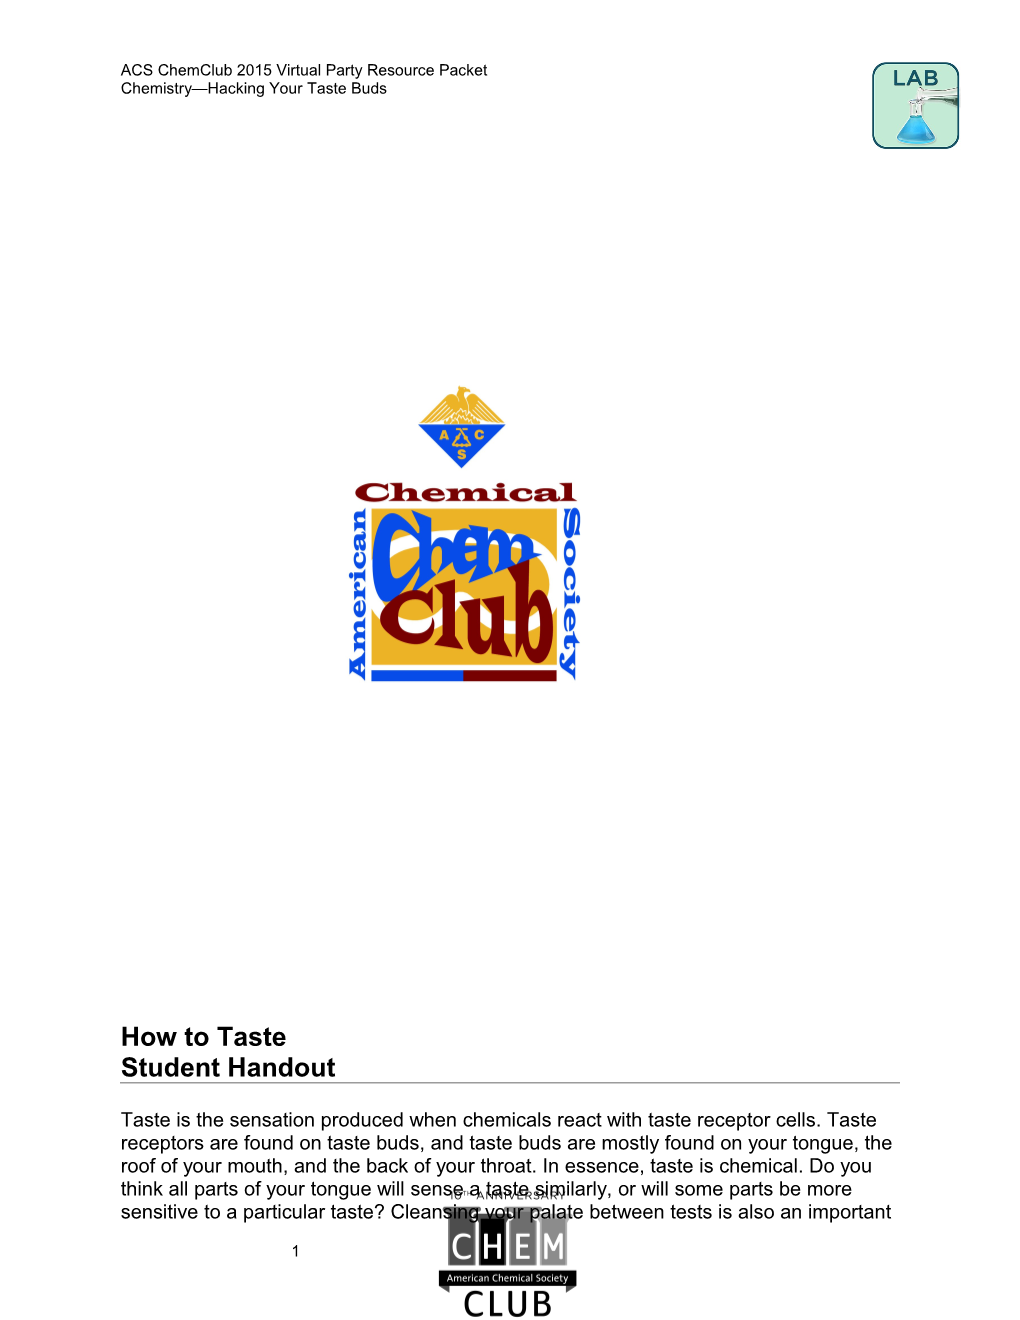 ACS Chemclub 2015 Virtual Party Resource Packet